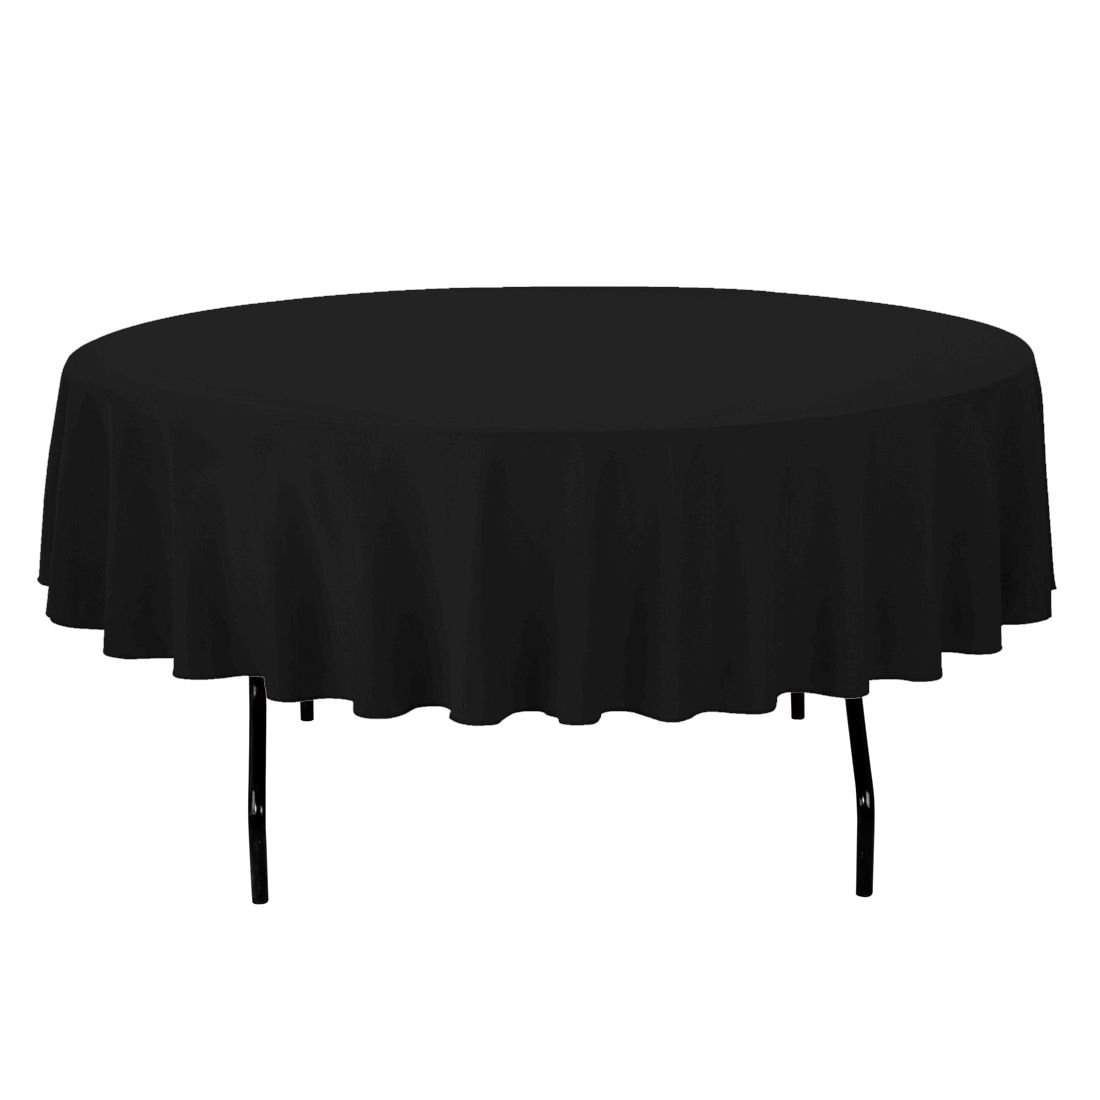 90 In. Round Spun Polyester Tablecloth Factory